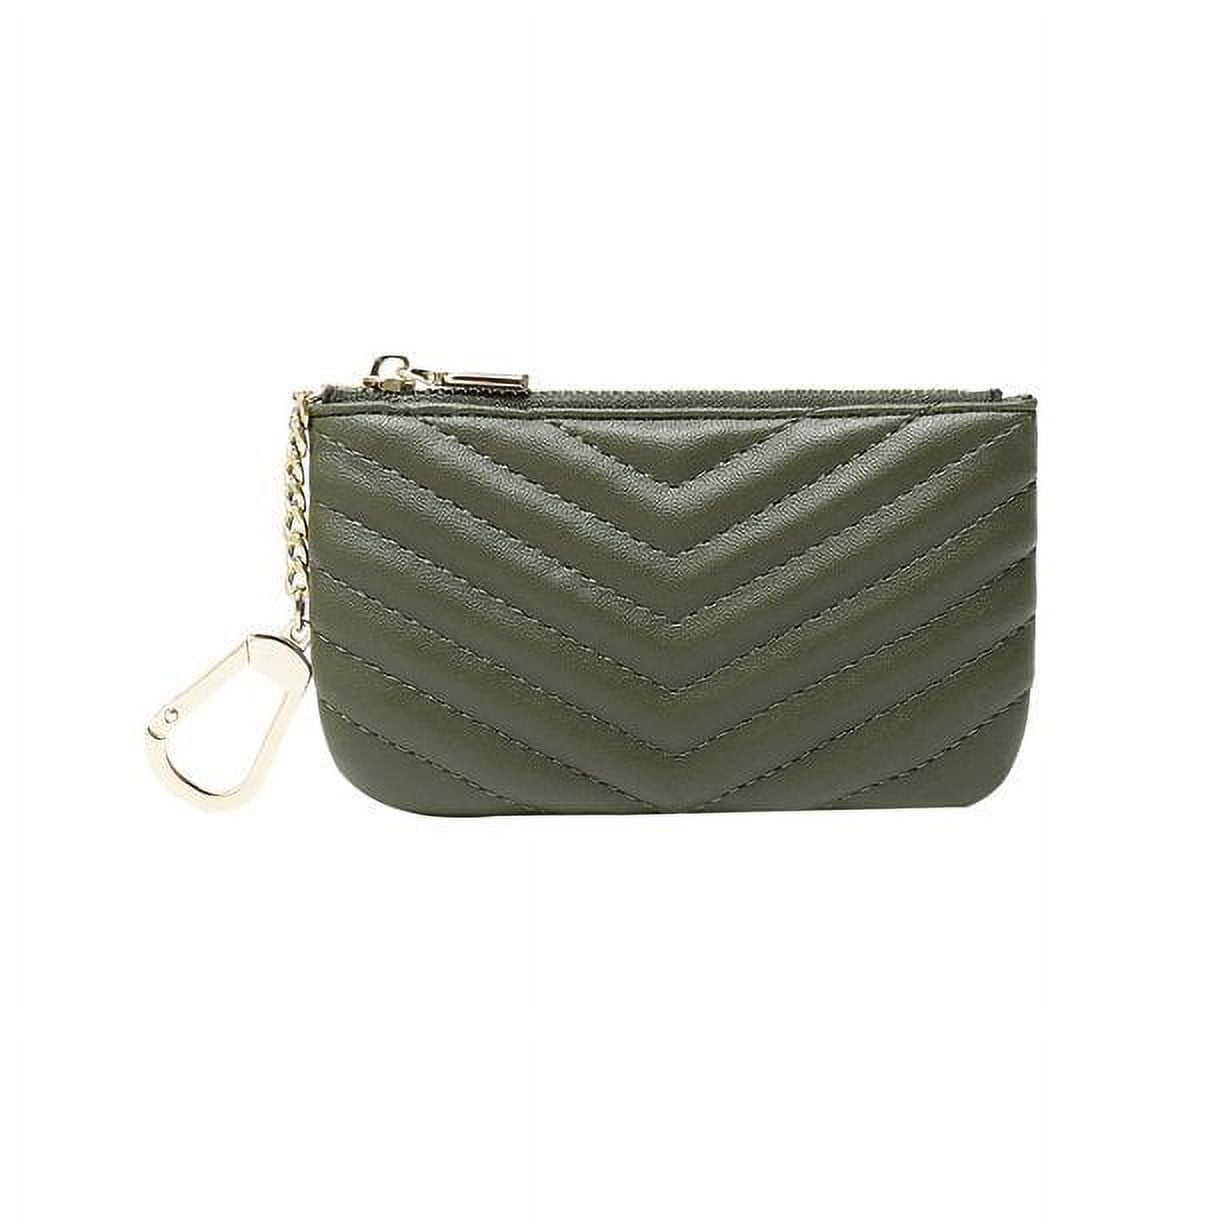 Daisy Rose Luxury Quilted Key Chain Pouch for Women PU Vegan Leather Coin Purse with Clasp Olive 4b75d84e 1b84 425c a9a1 a7ce2d5900eb.5e06772d410696d7cf418273e5a80f2f